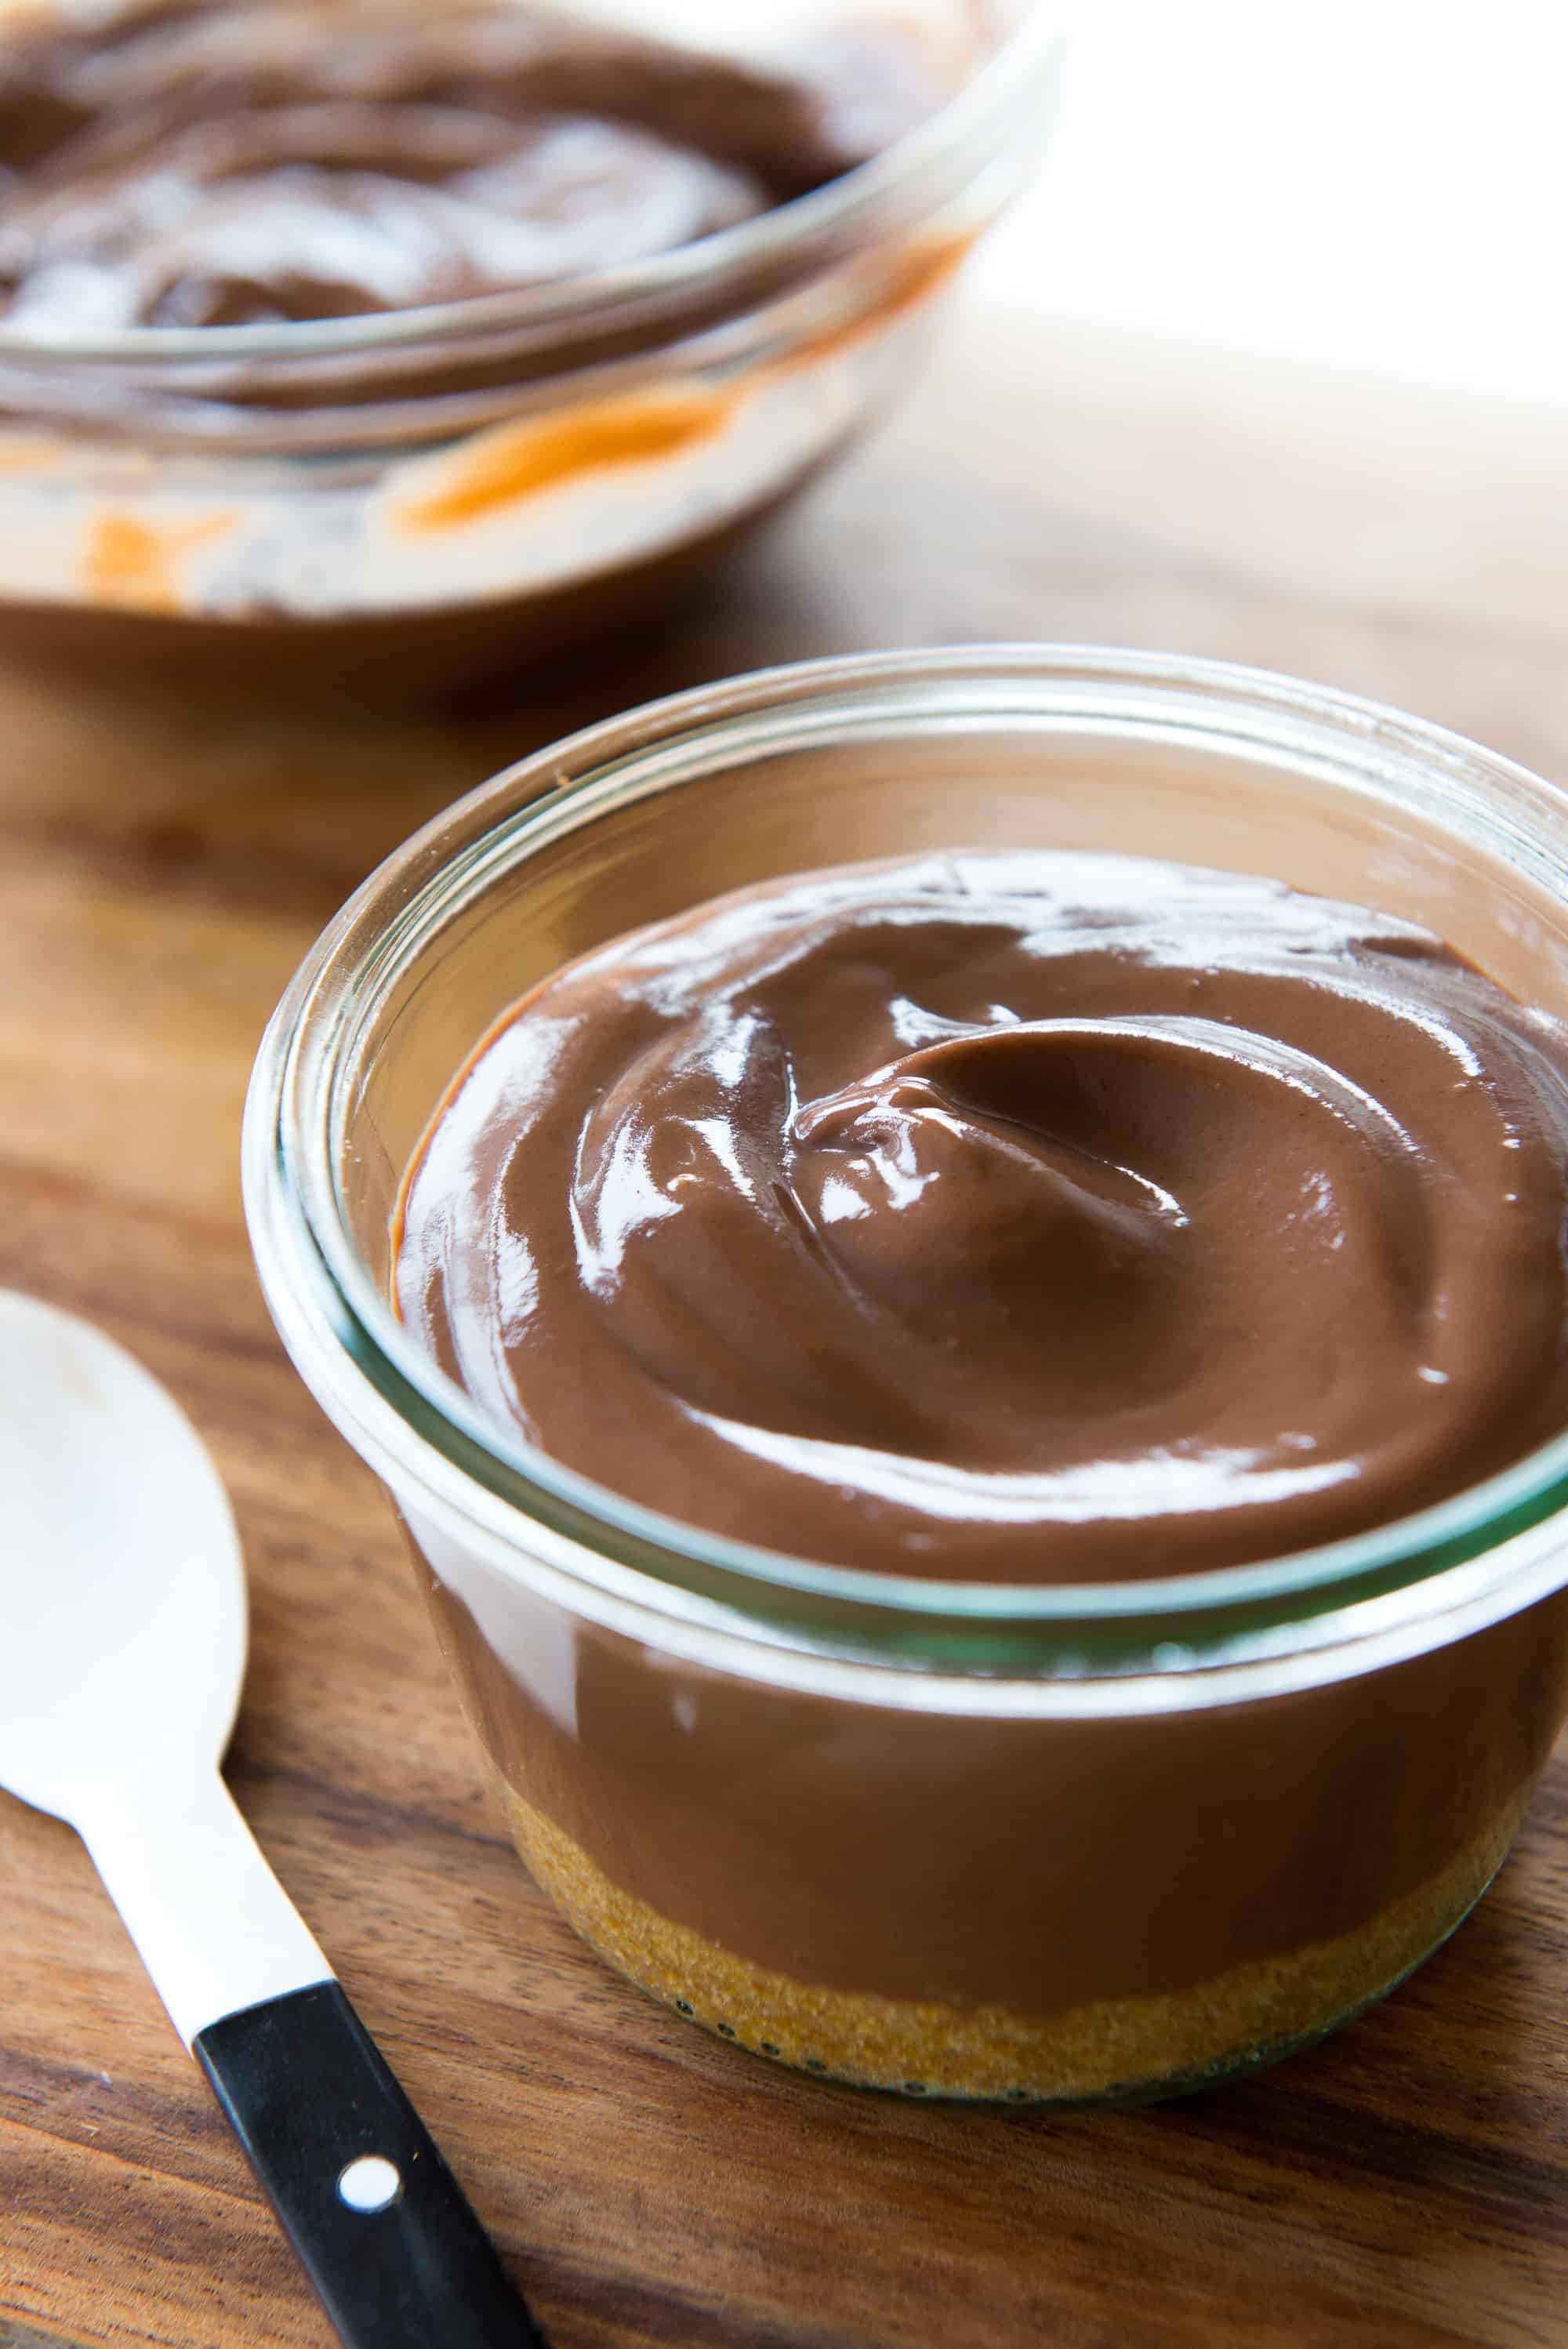 Delicious Pudding Recipes Made at Home: Treats You Can't Resist!